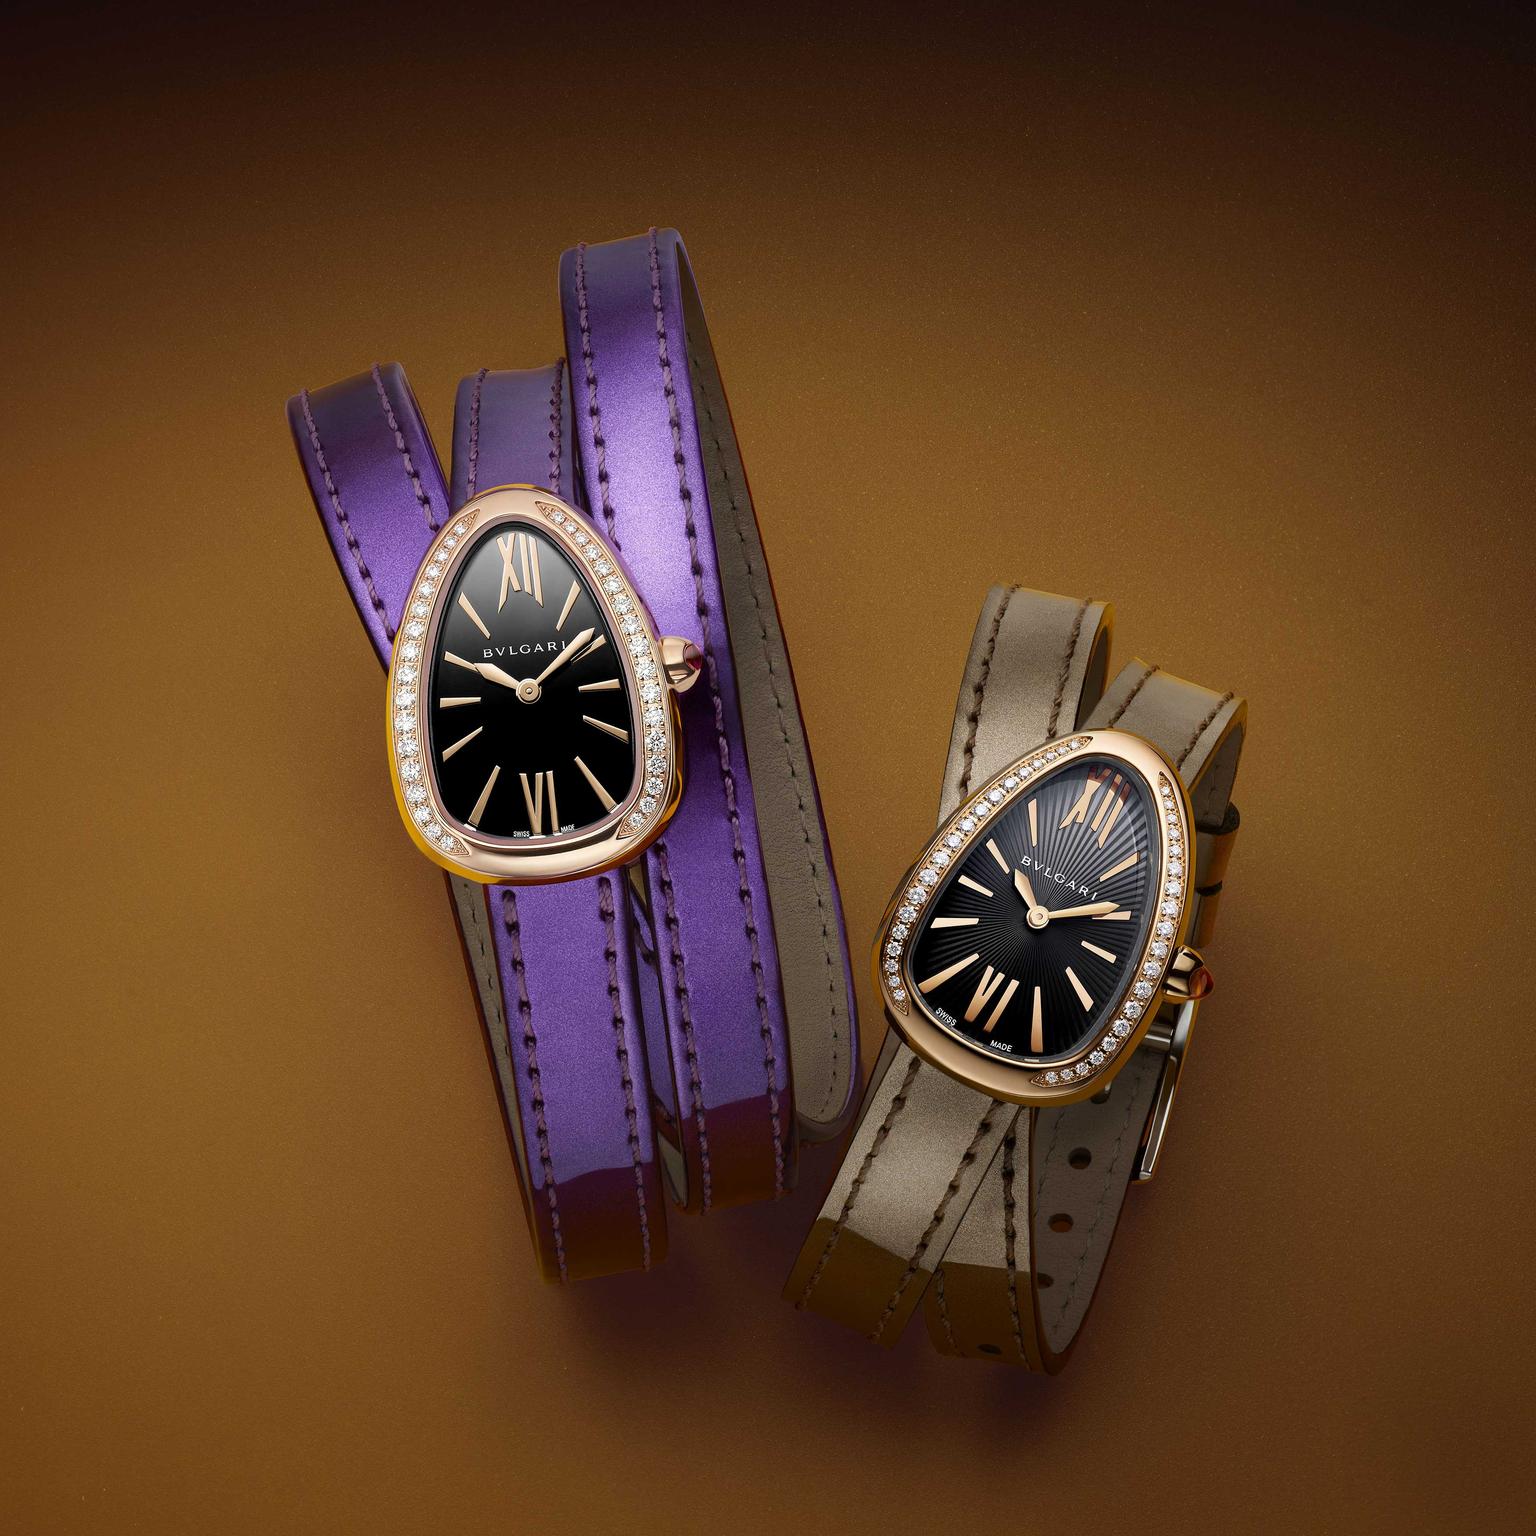 Guido Terreni on Changes, Innovations & Ambitions for Bulgari Watches